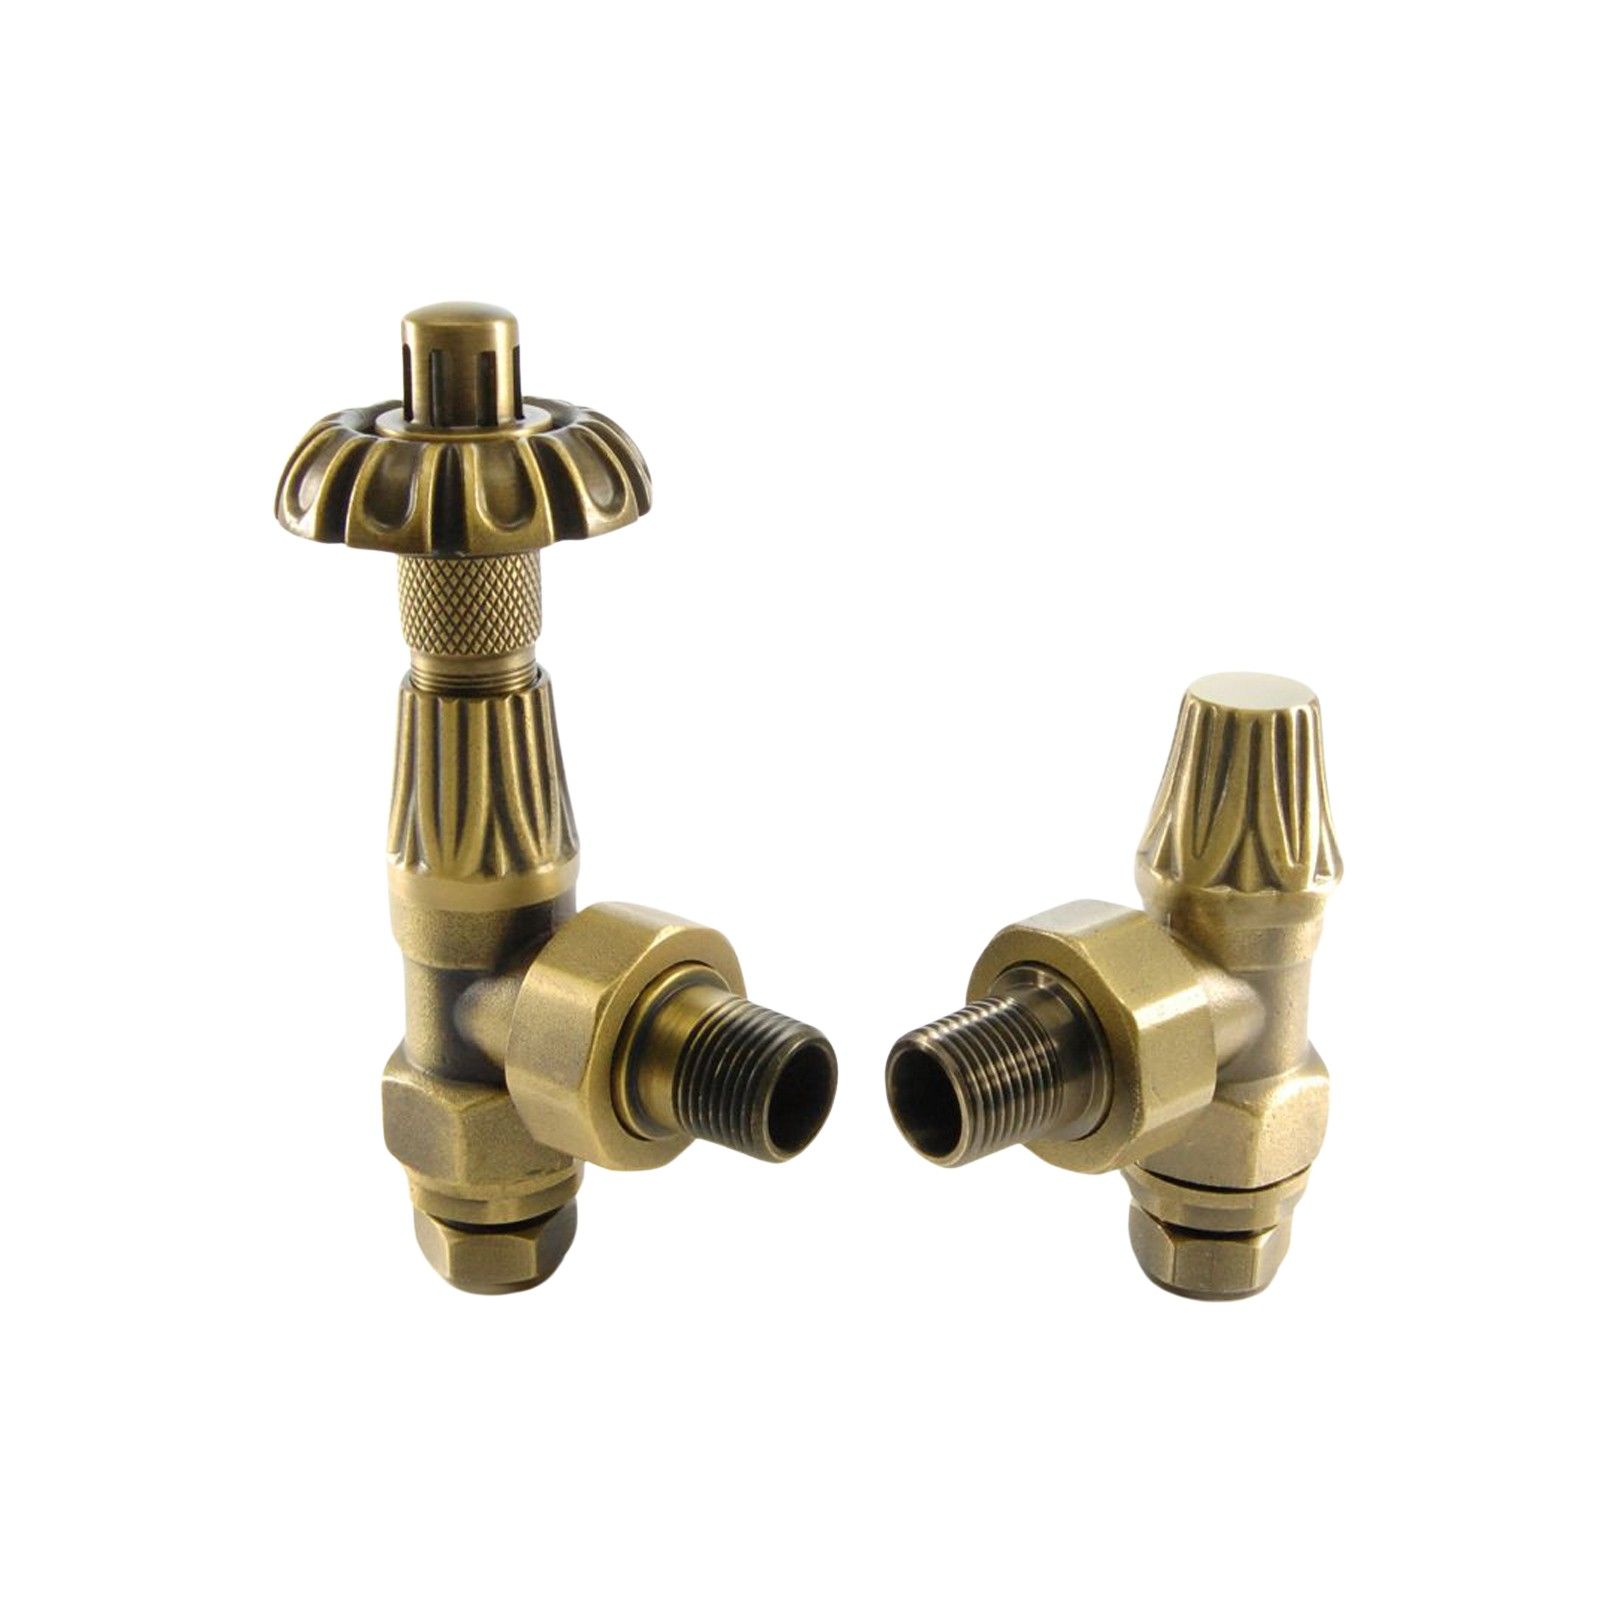 Versailles Thermostatic Radiator valve set - 1/2” or 3/4” connection